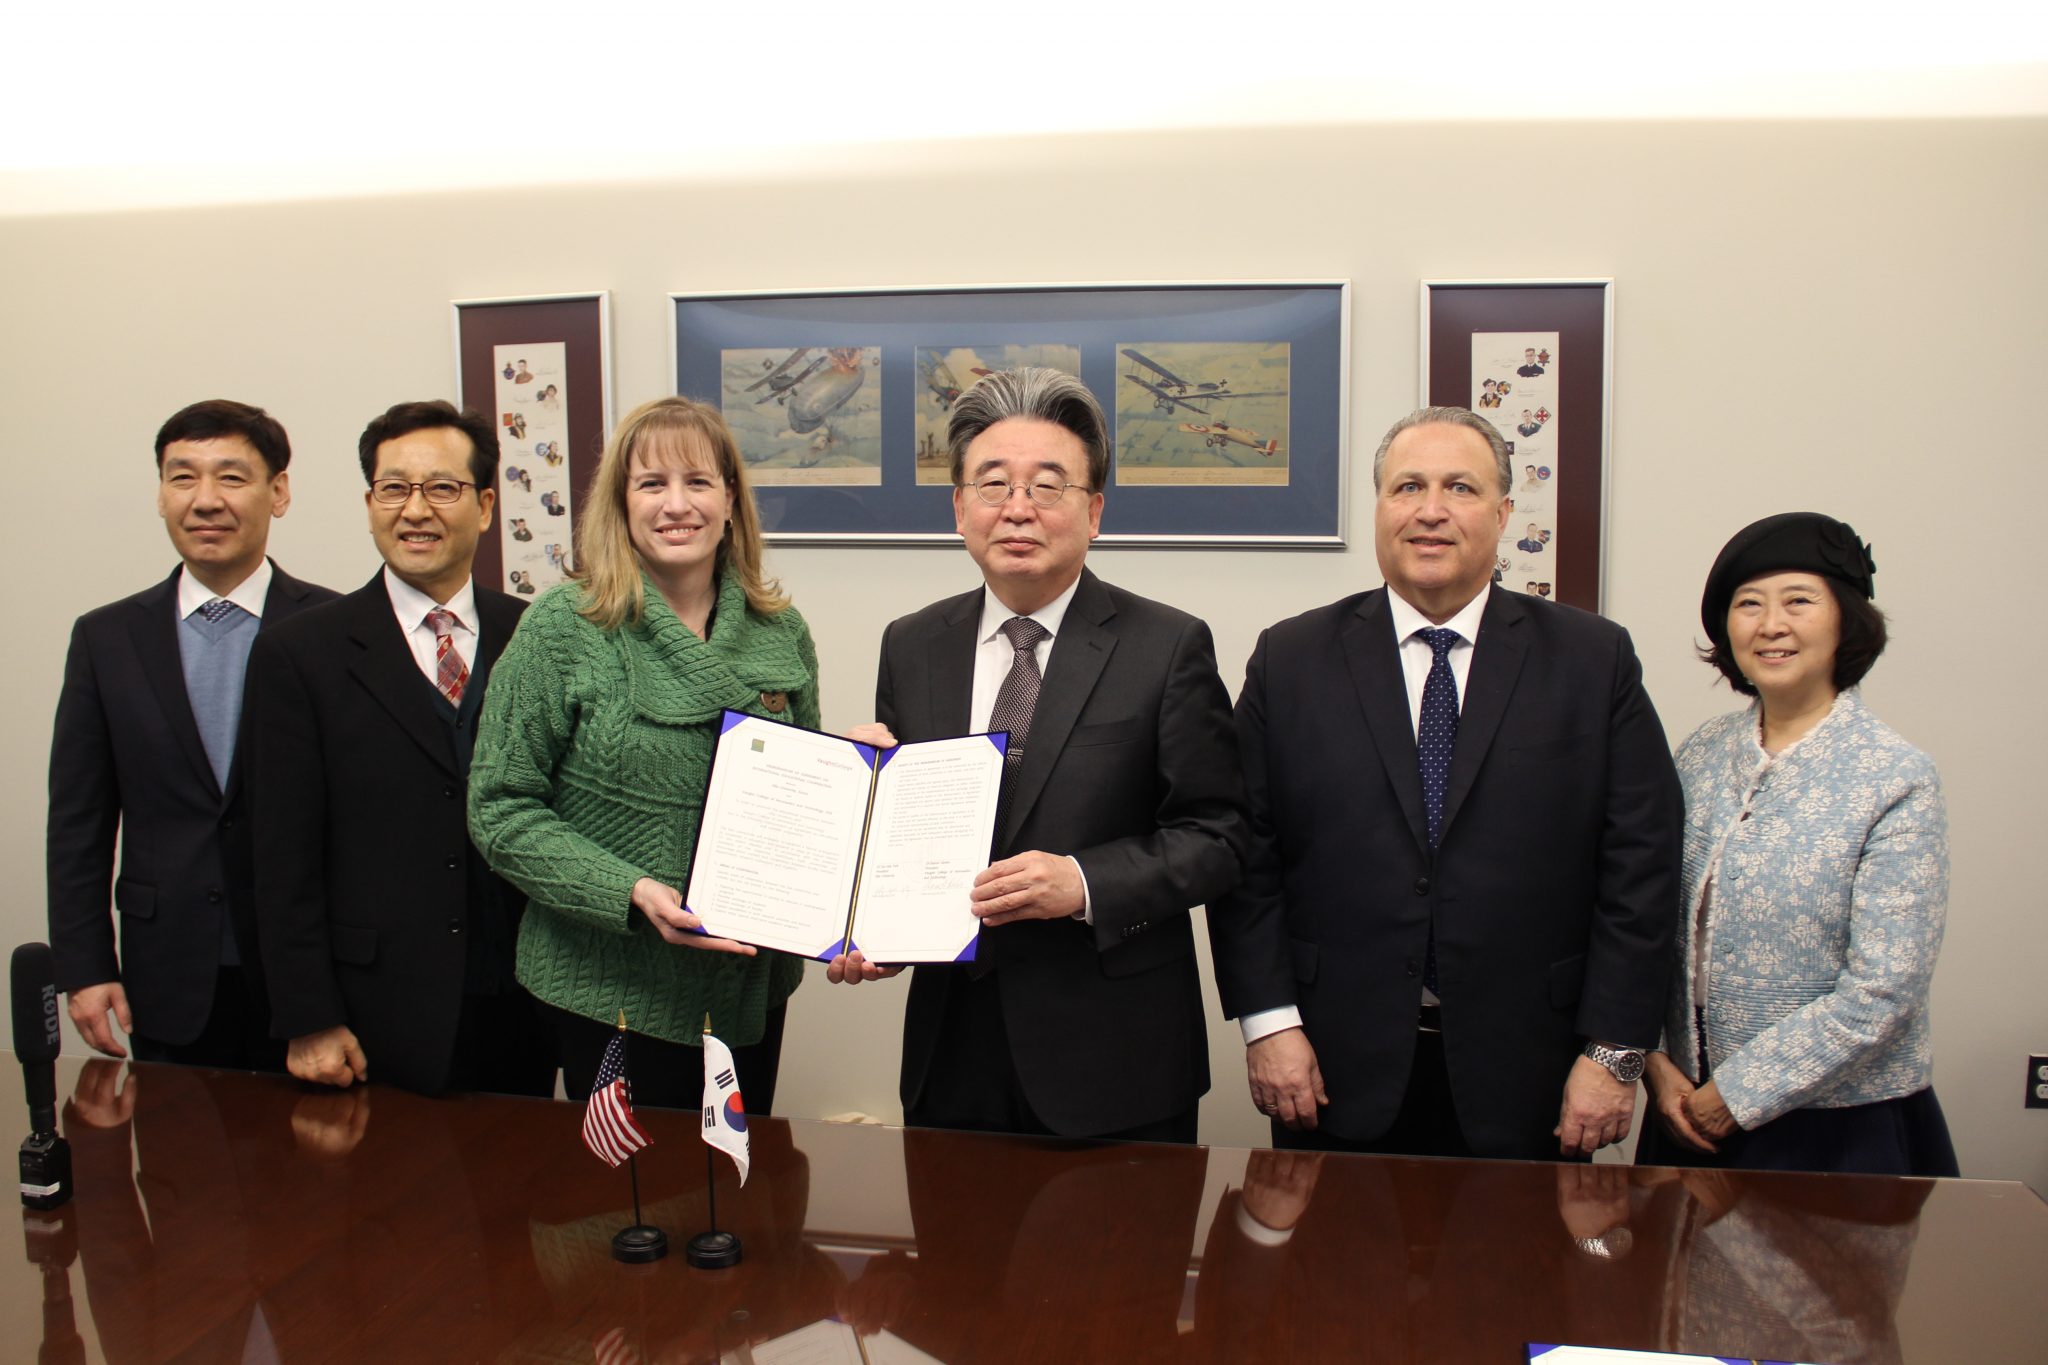 Vaughn College Signs Agreement with South Korean University for More Student Opportunities